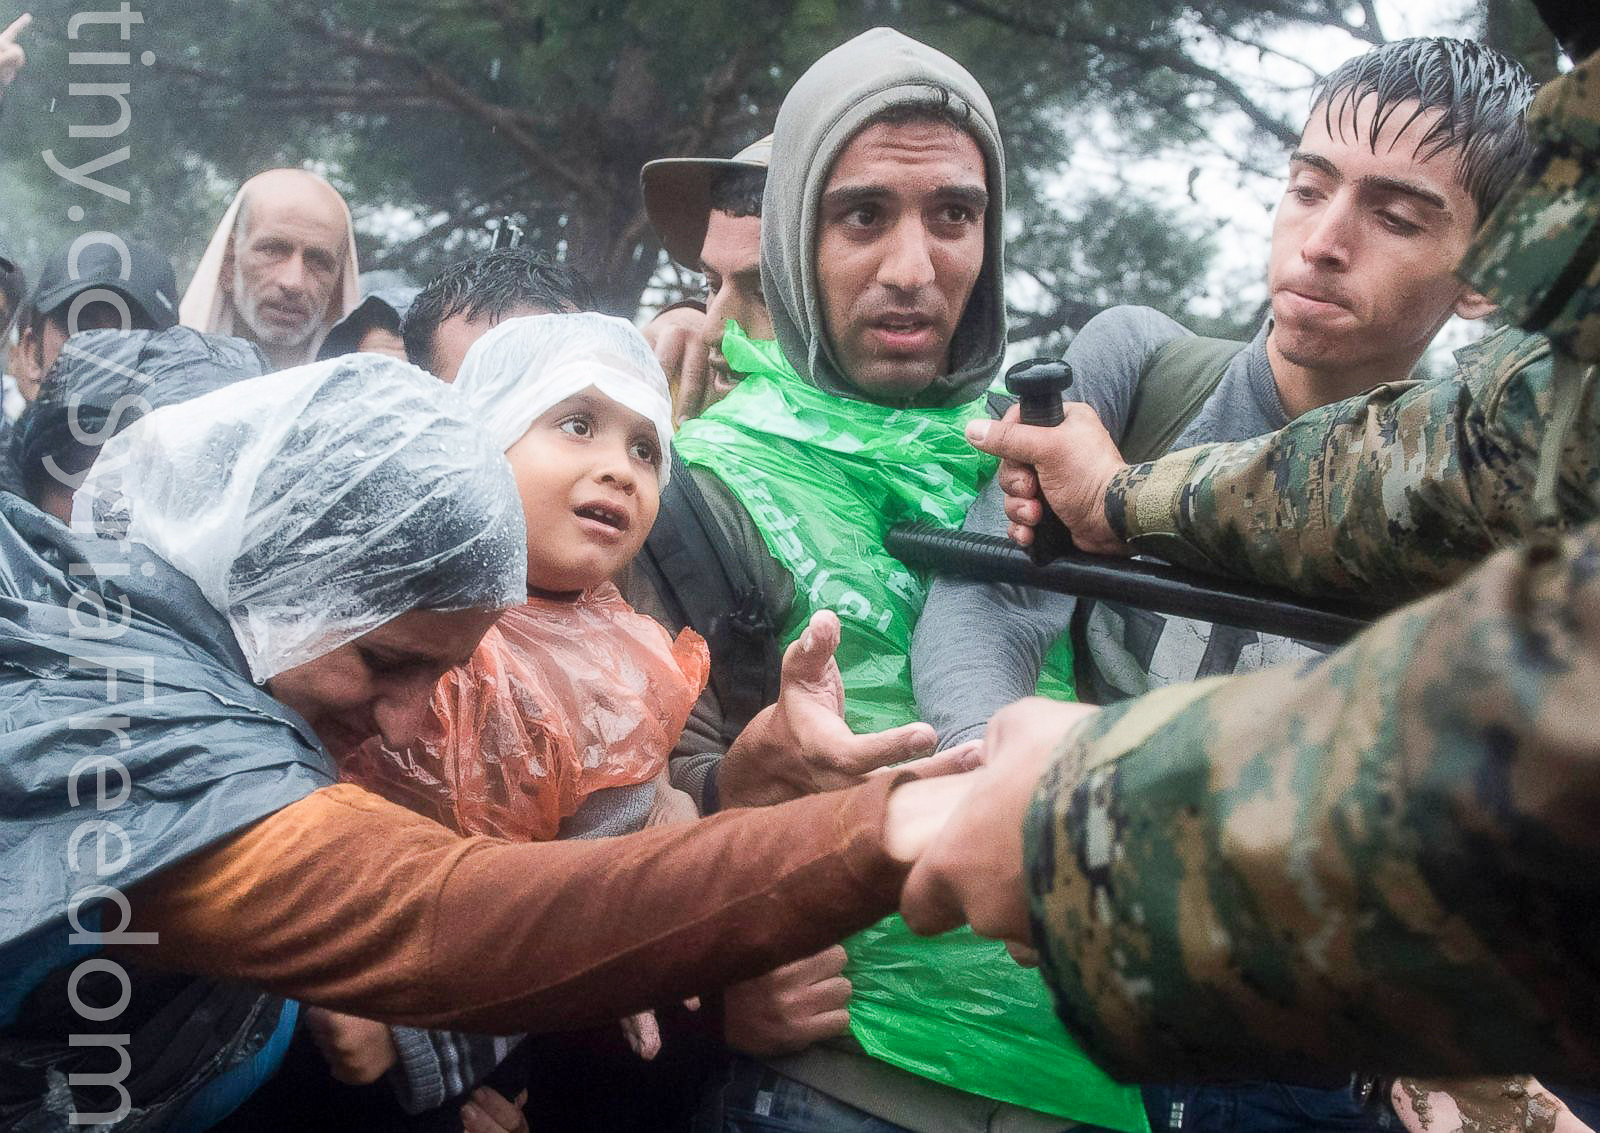 Thousands of people braved torrential downpours to cross Greece's northern border with Macedonia | by FreedomHouse